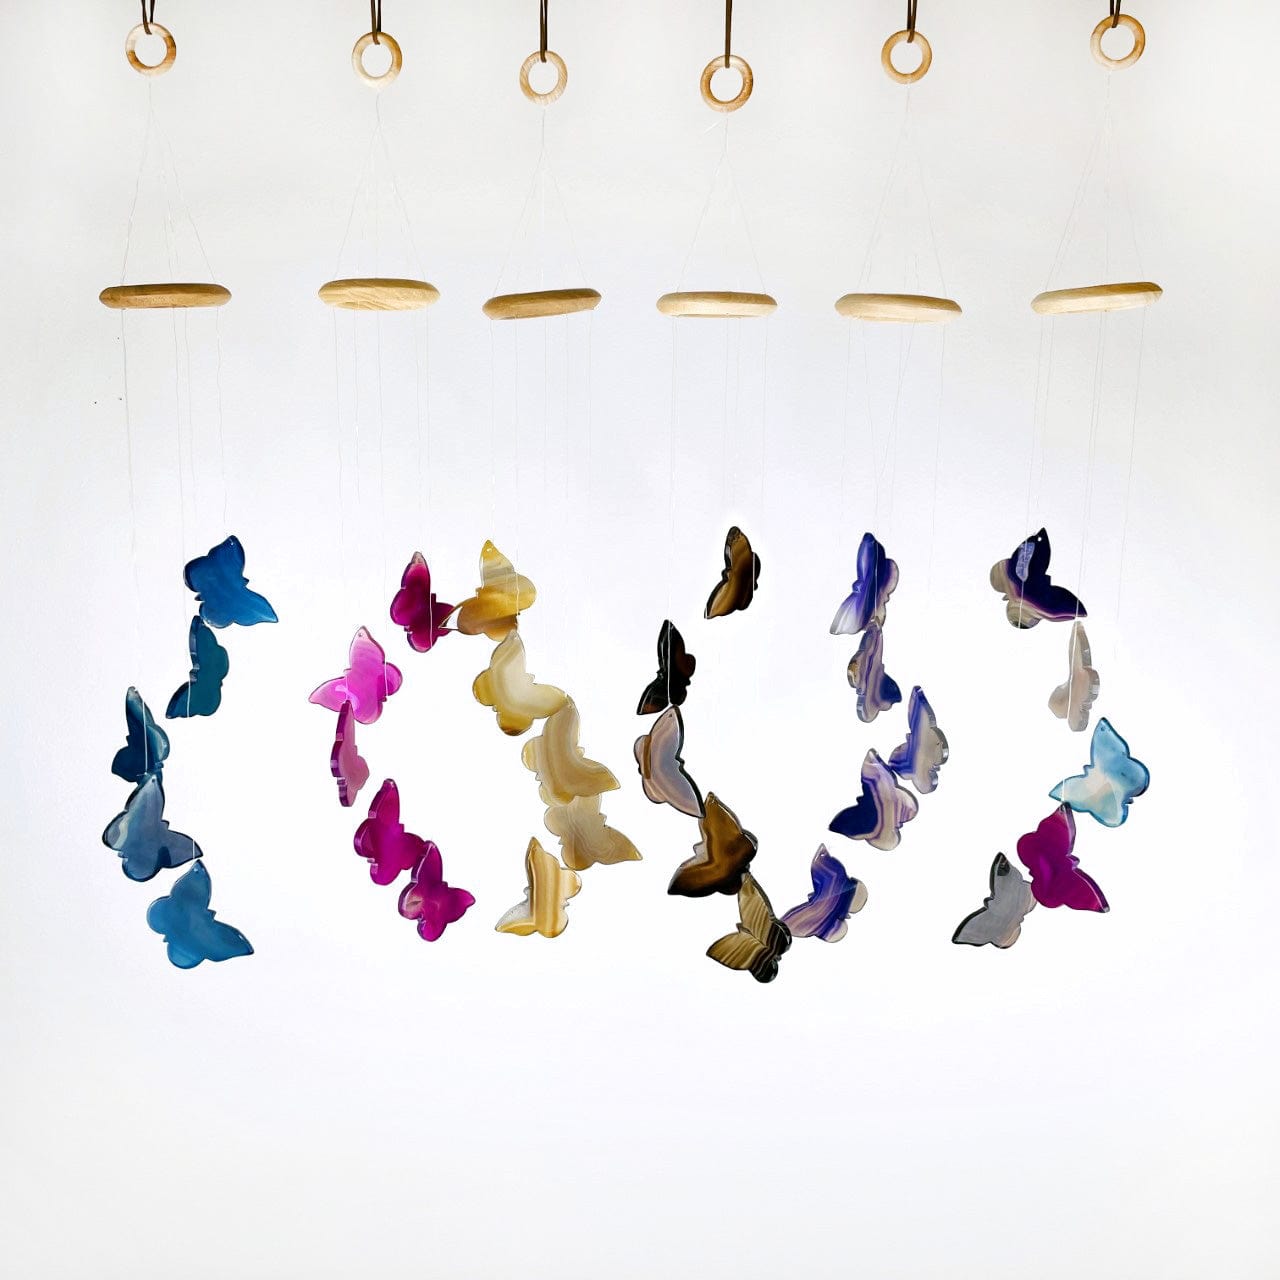 all colors of agate butterfly wind chimes hanging in a row